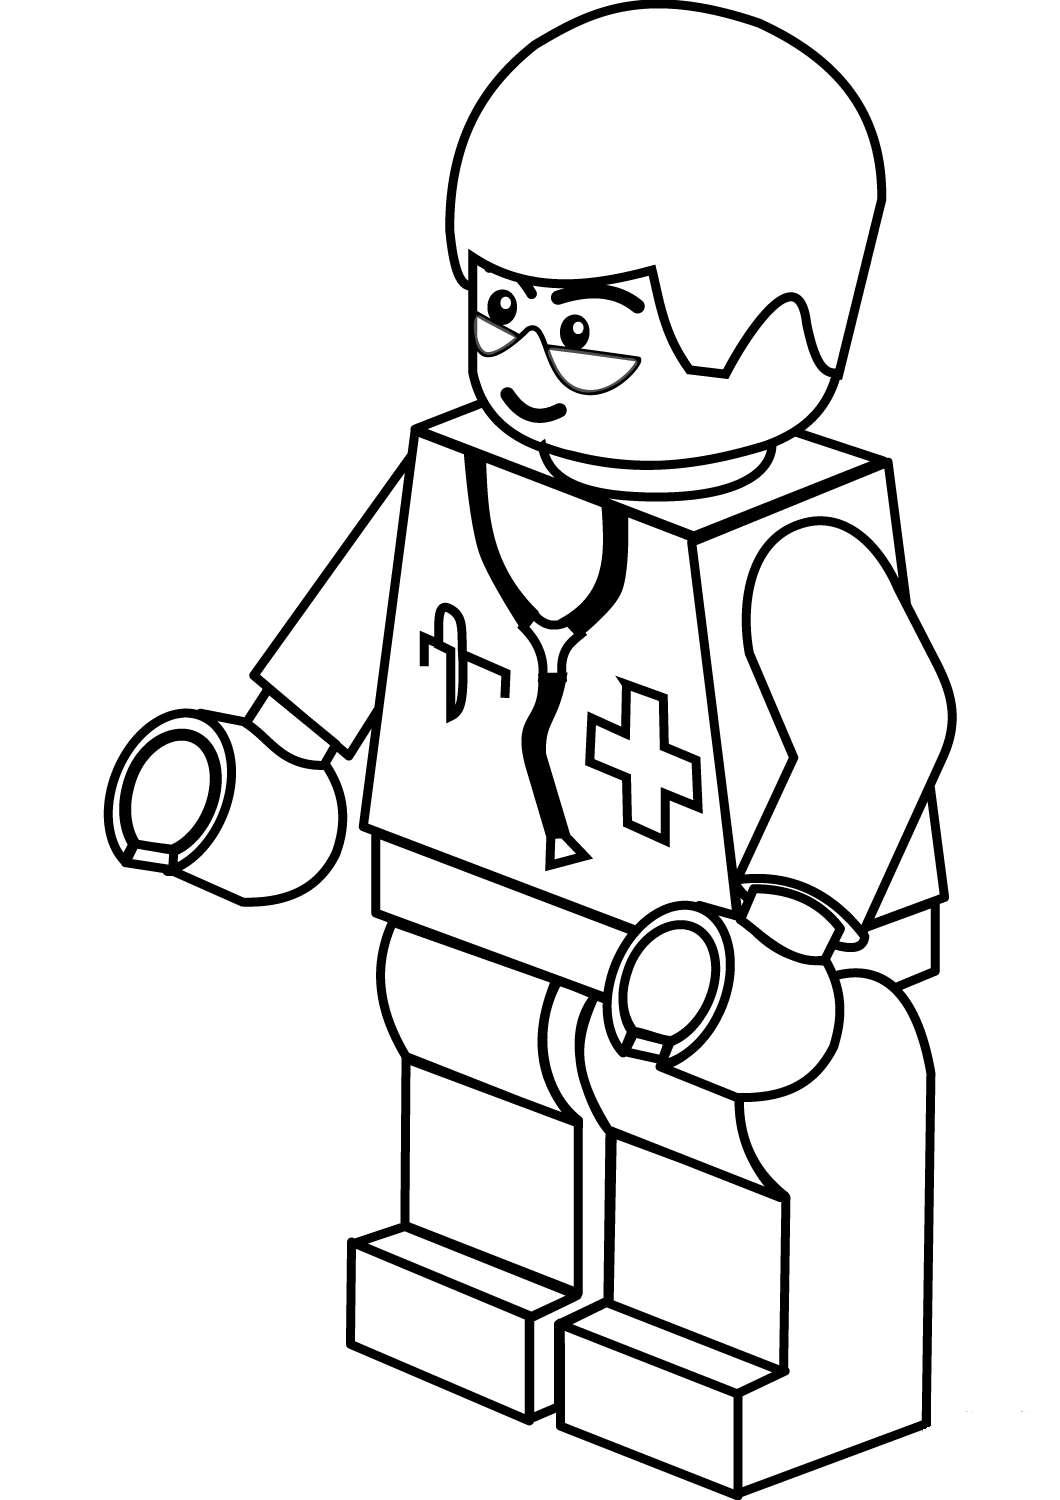 Lego Doctor Coloring Page - Free Printable Coloring Pages for Kids